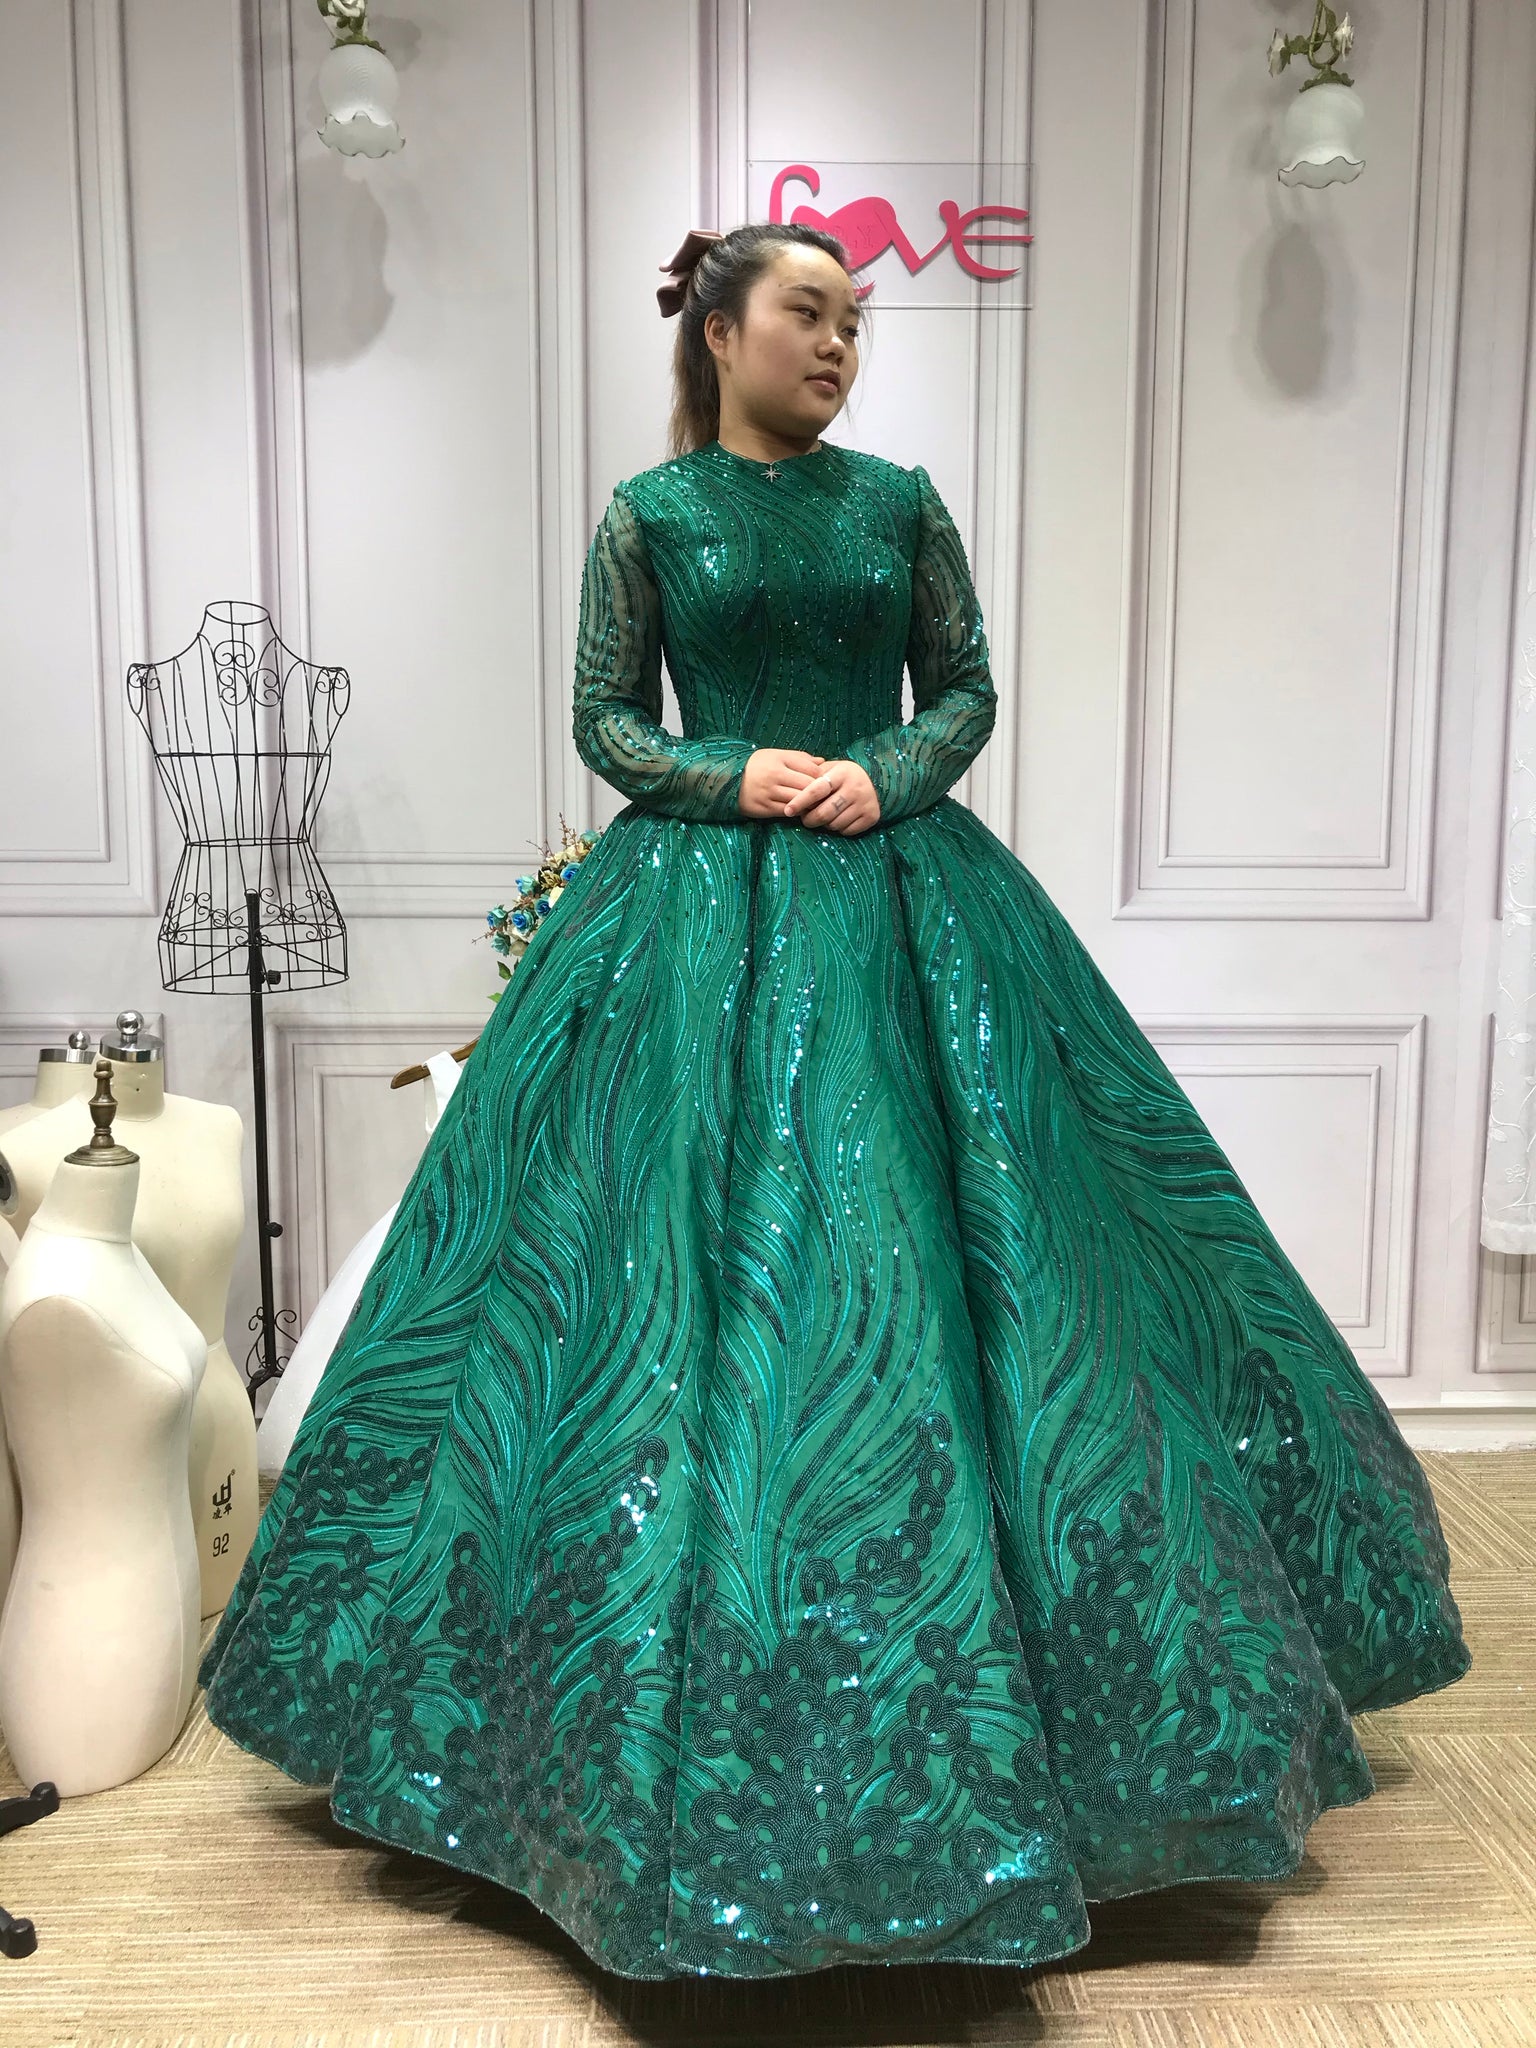 gorgeous green gown | Green wedding dresses, Beautiful dresses, Green gown